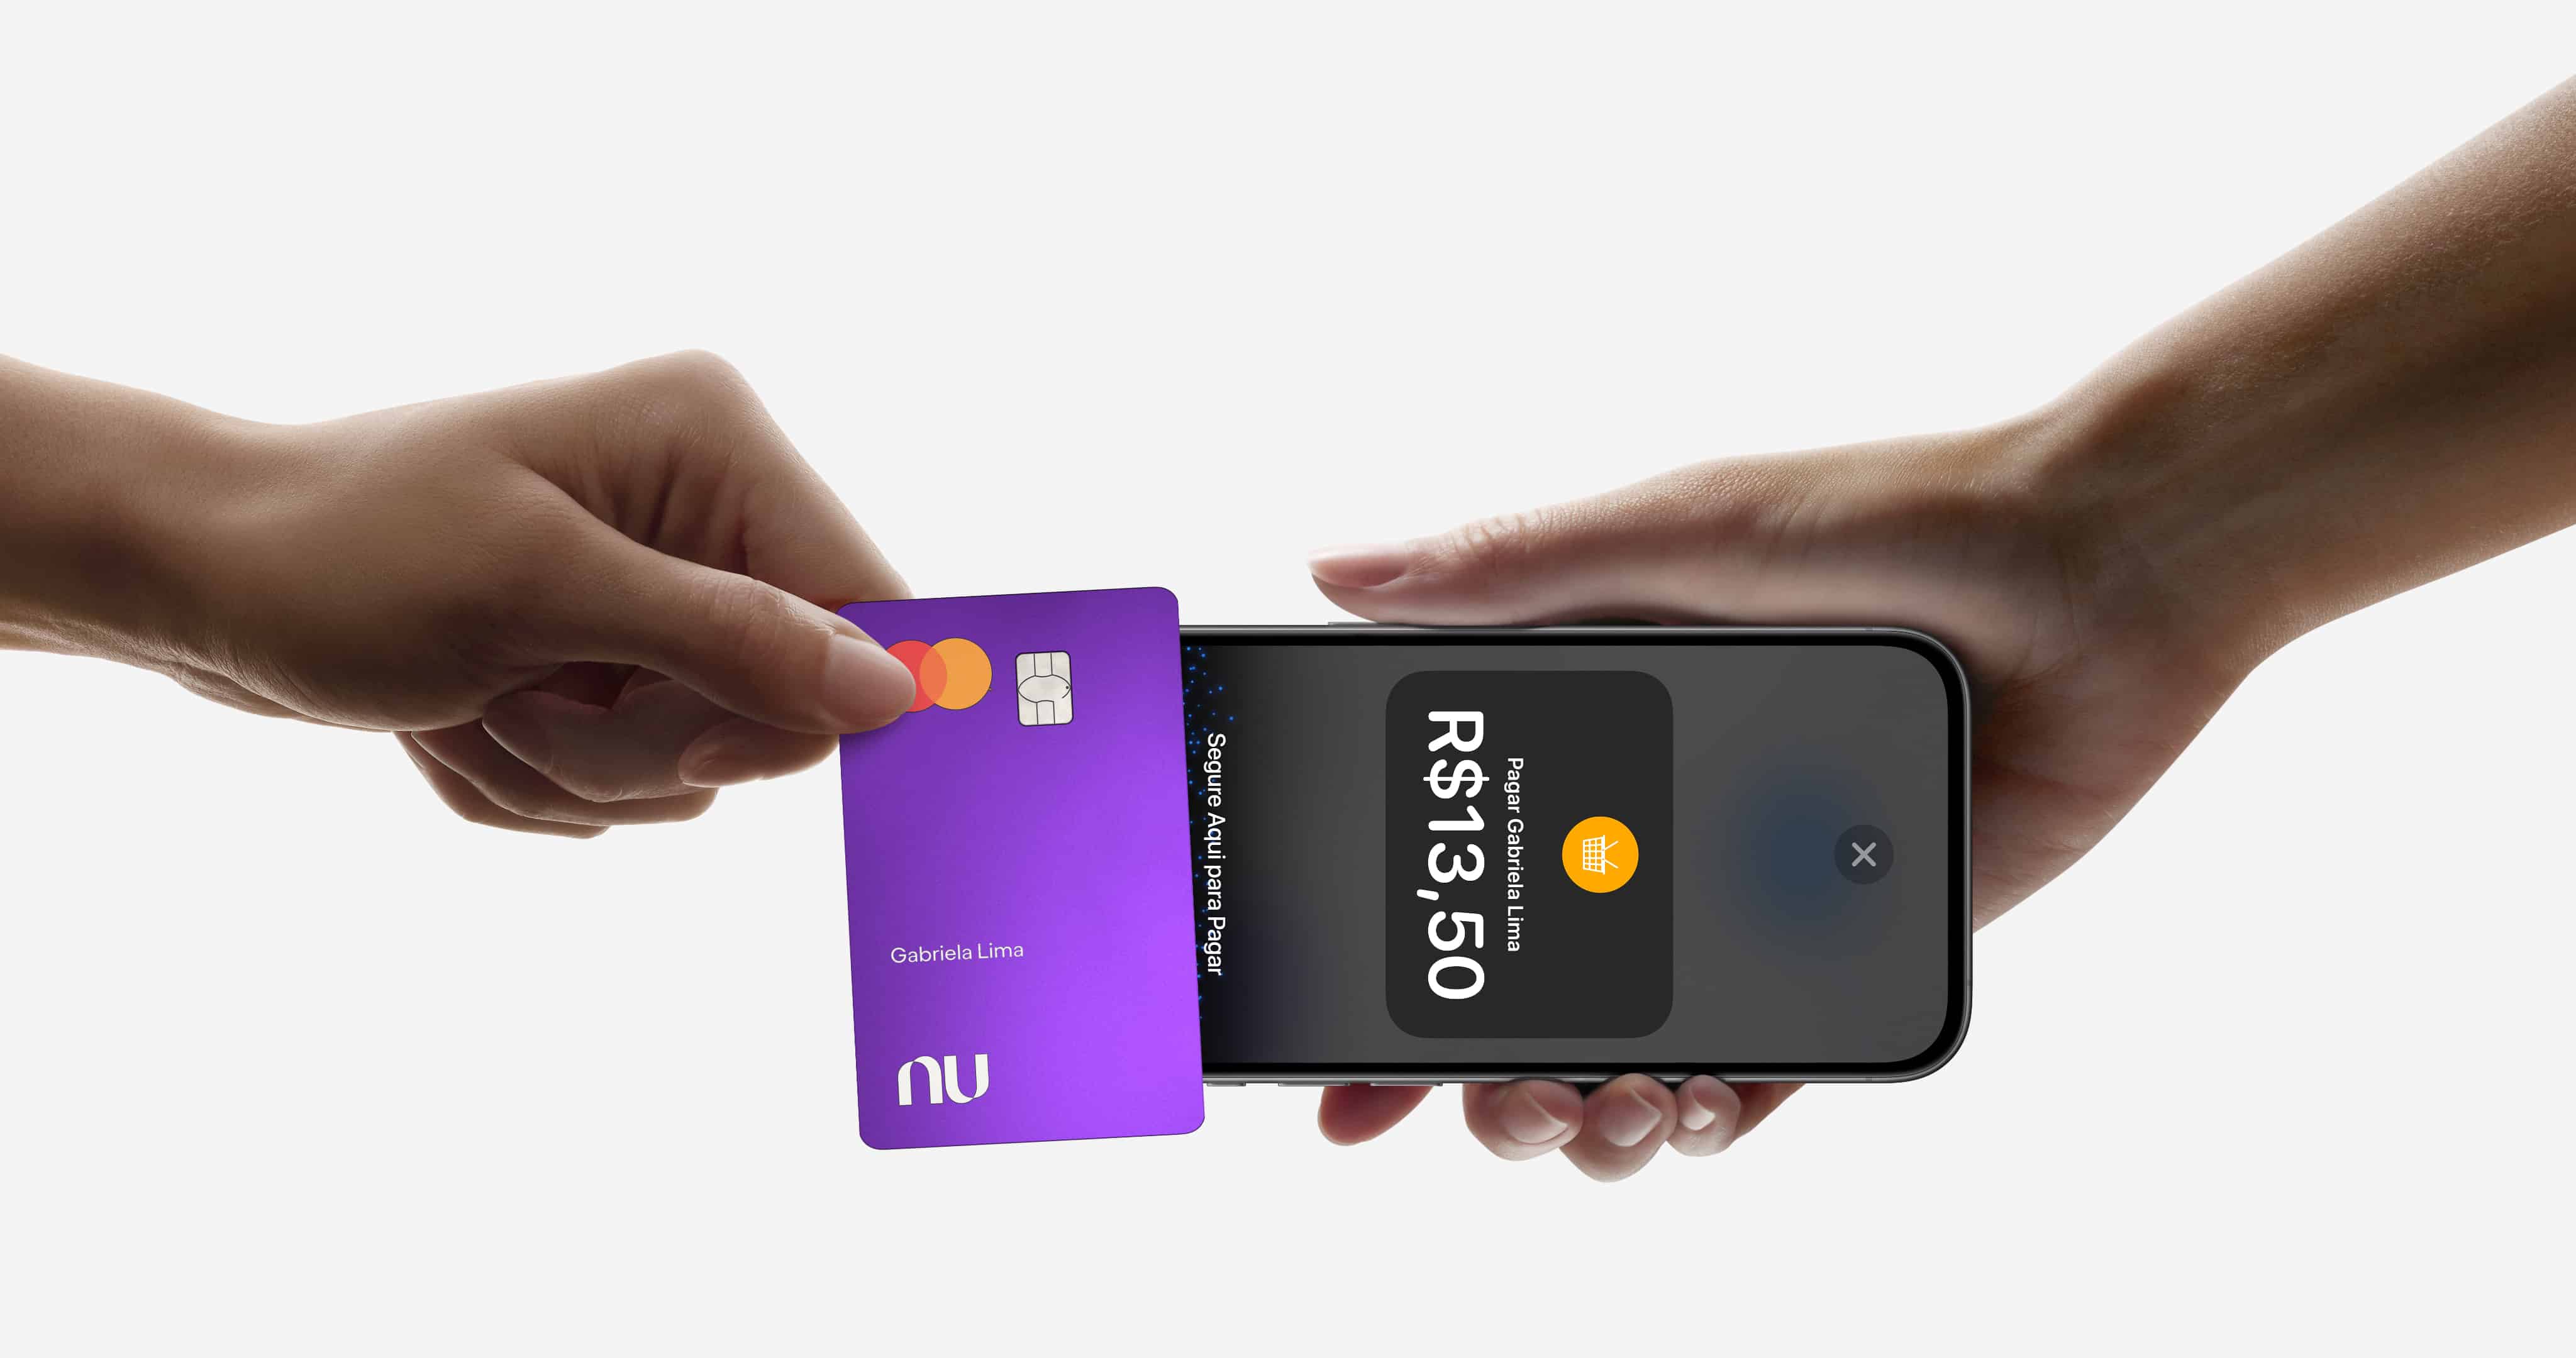 Tap to Pay do Nubank no iPhone